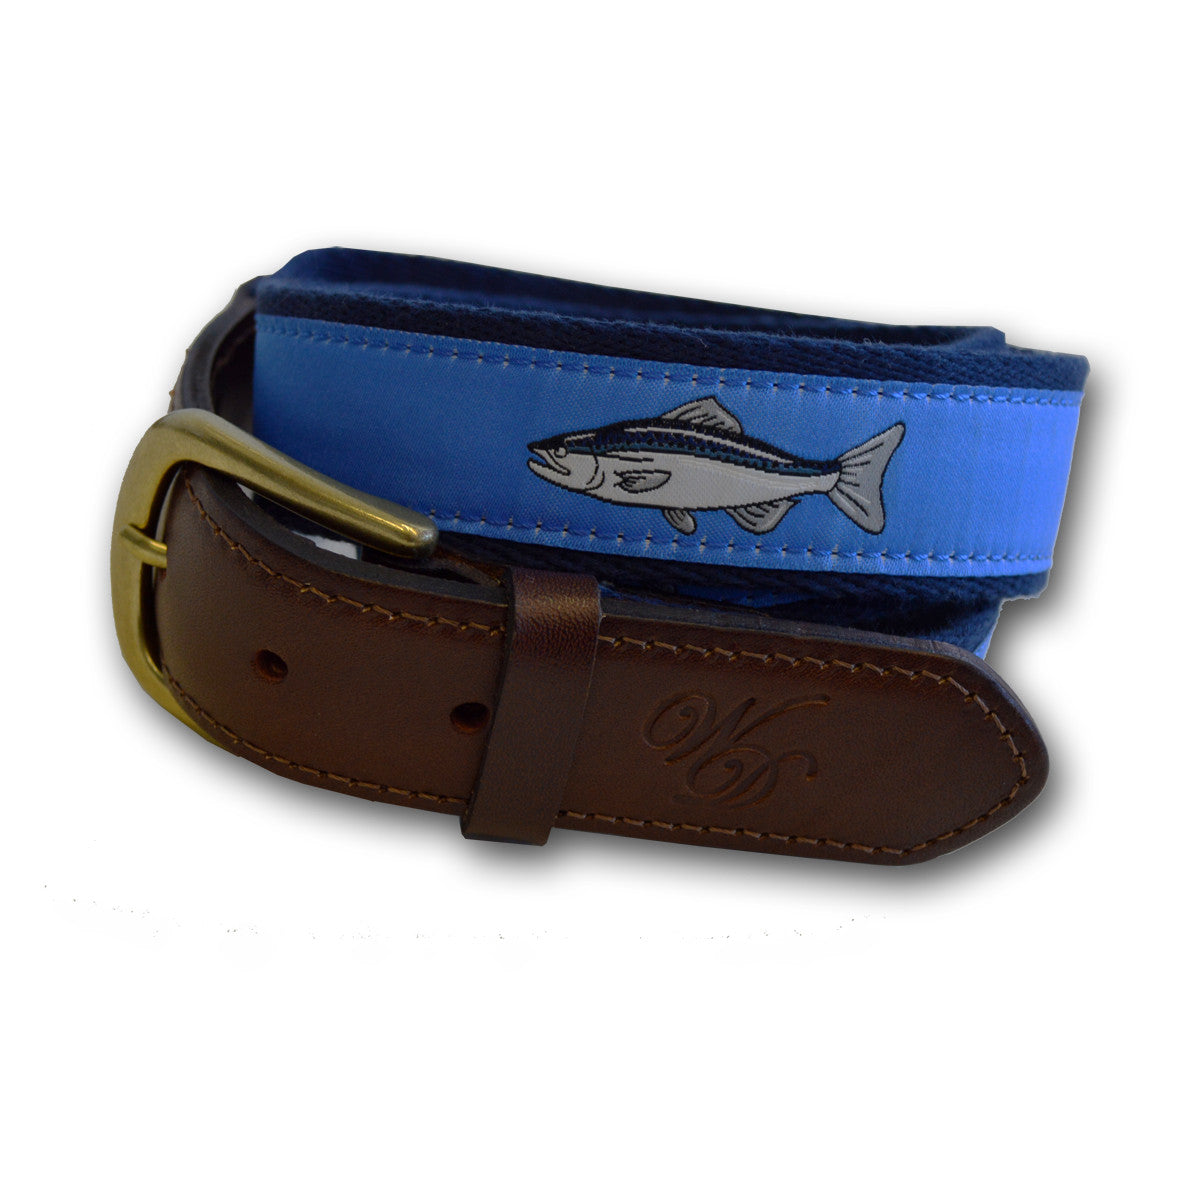 Salmon Cnavas and Leather belt by Wingfield Digby